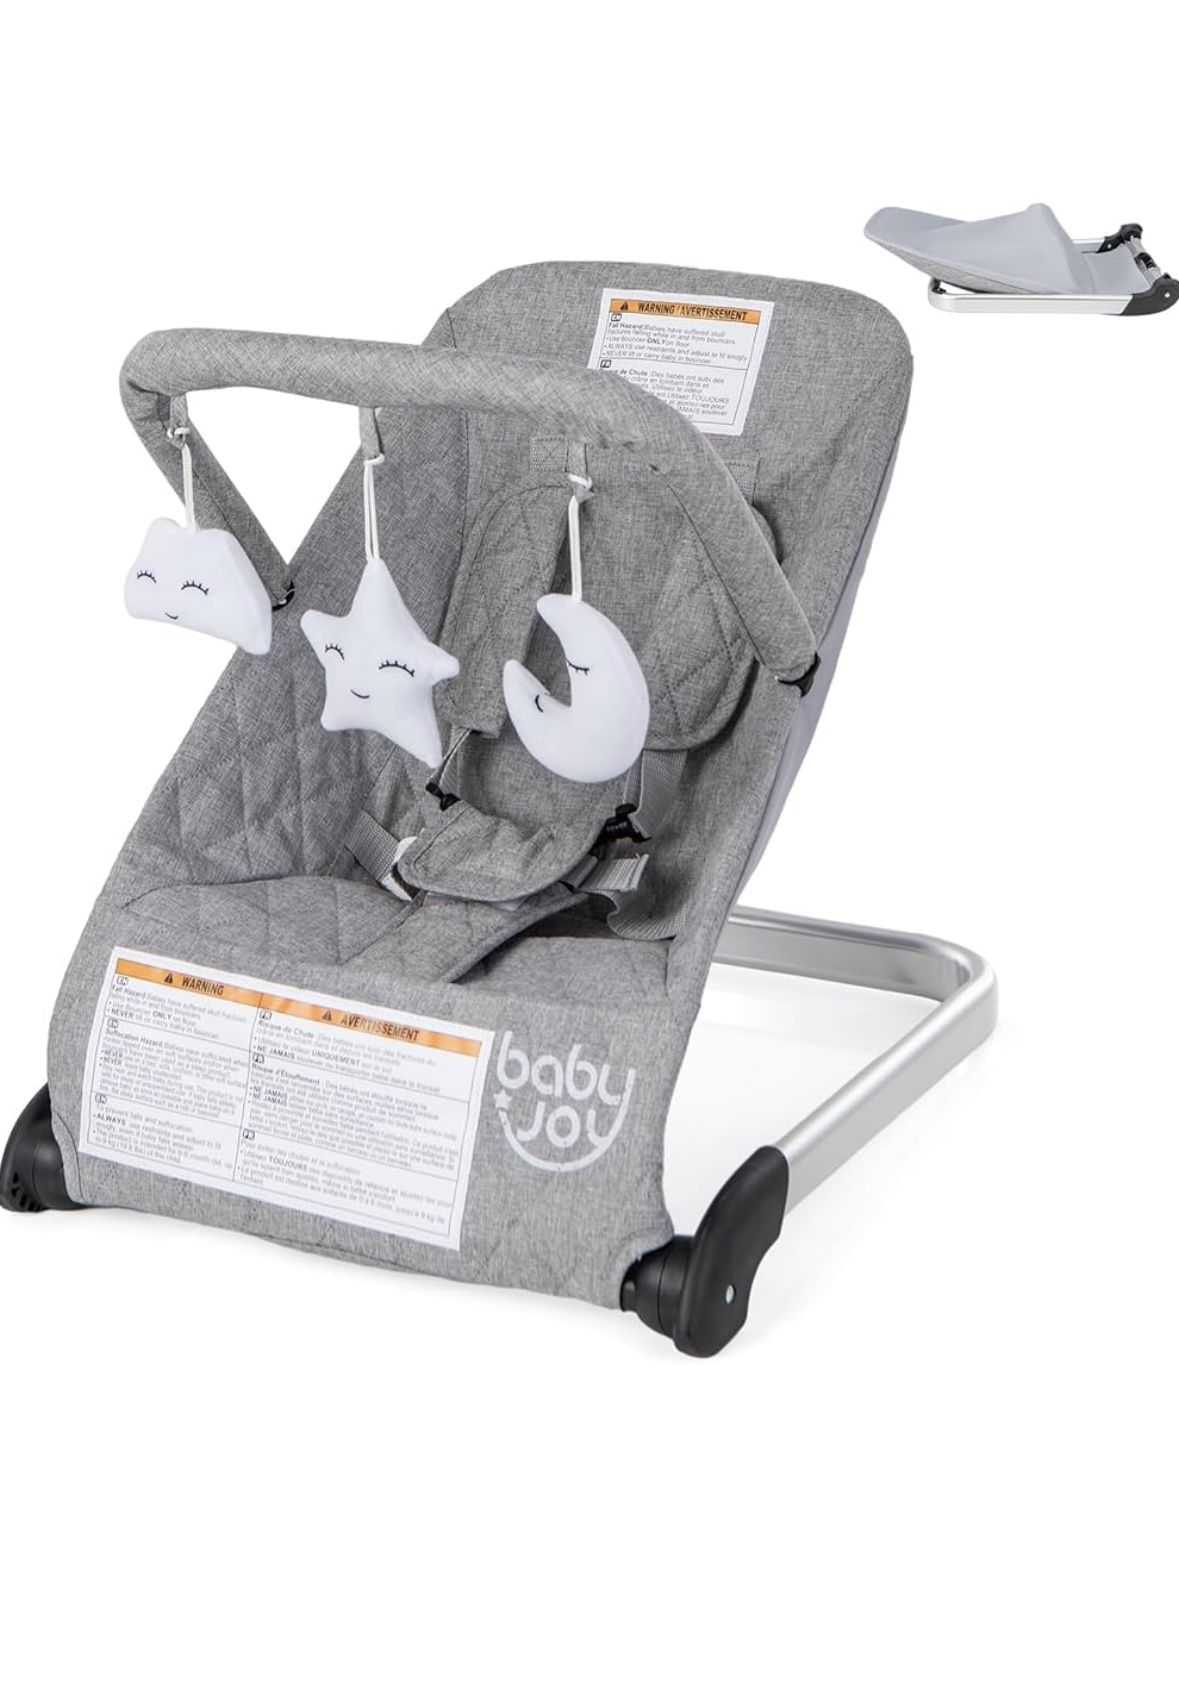 BY JOY Baby Bouncer, Foldable 